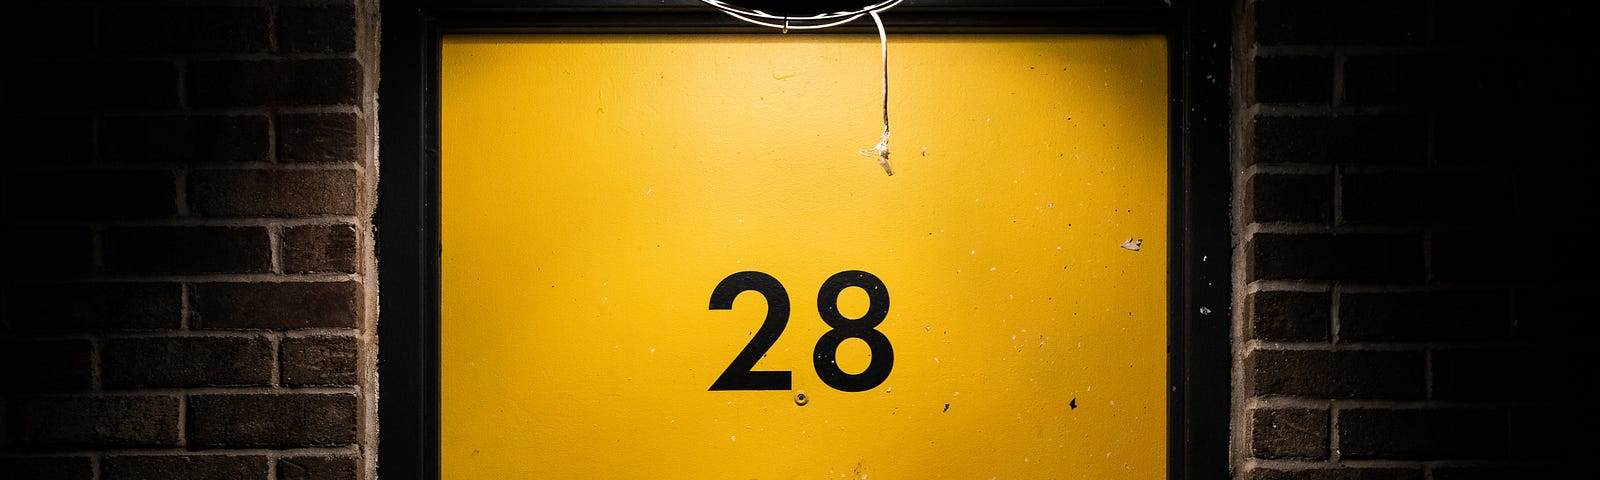 A harshely lit yellow door, with the number 28 on it.